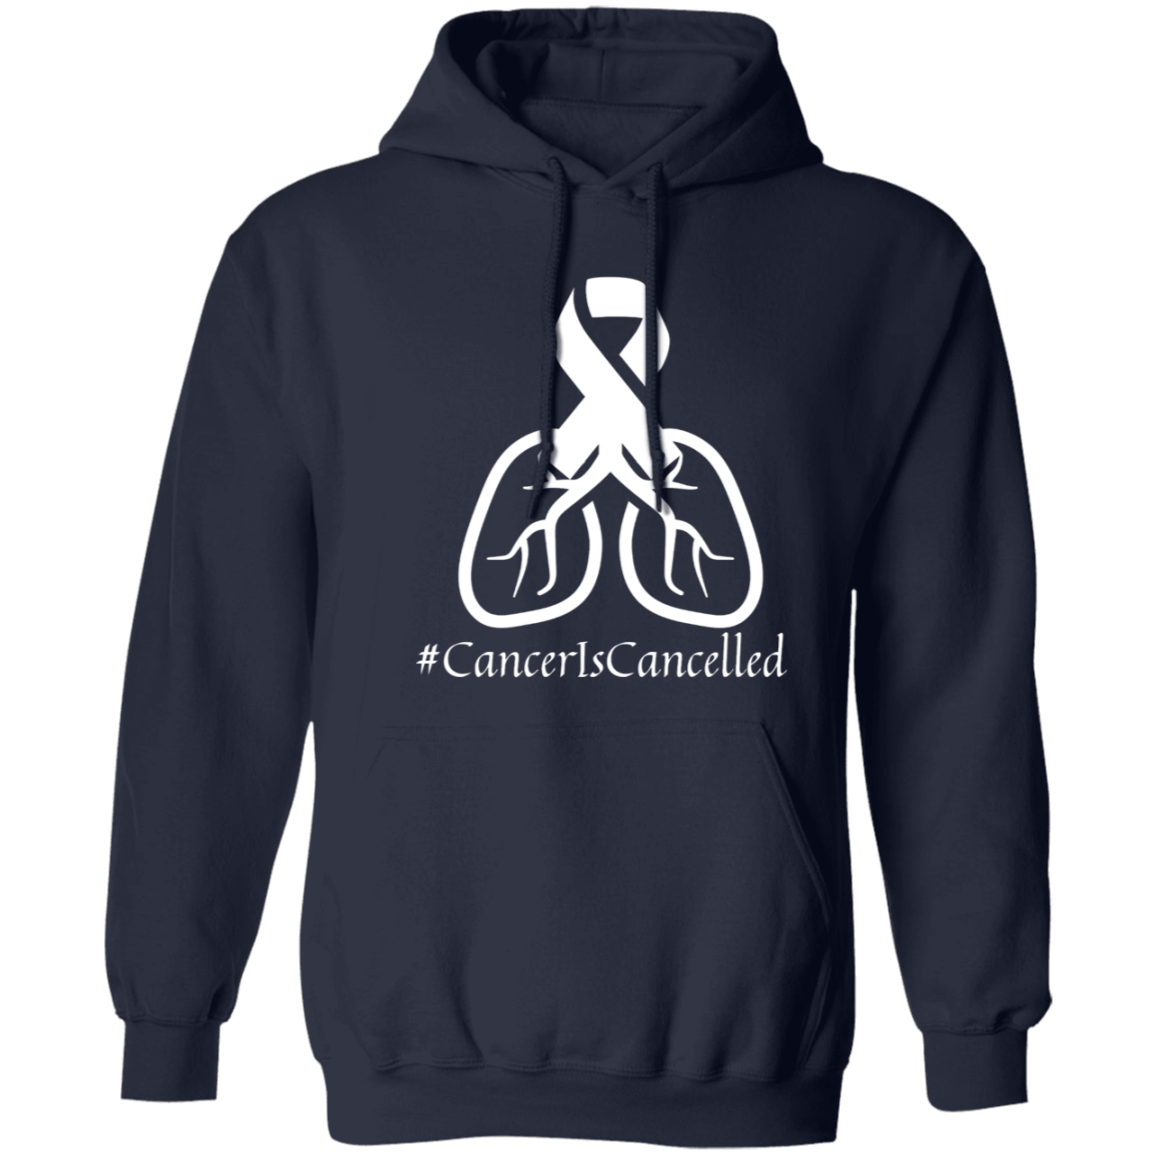 Cancer Is Cancelled Hoodie - White logo